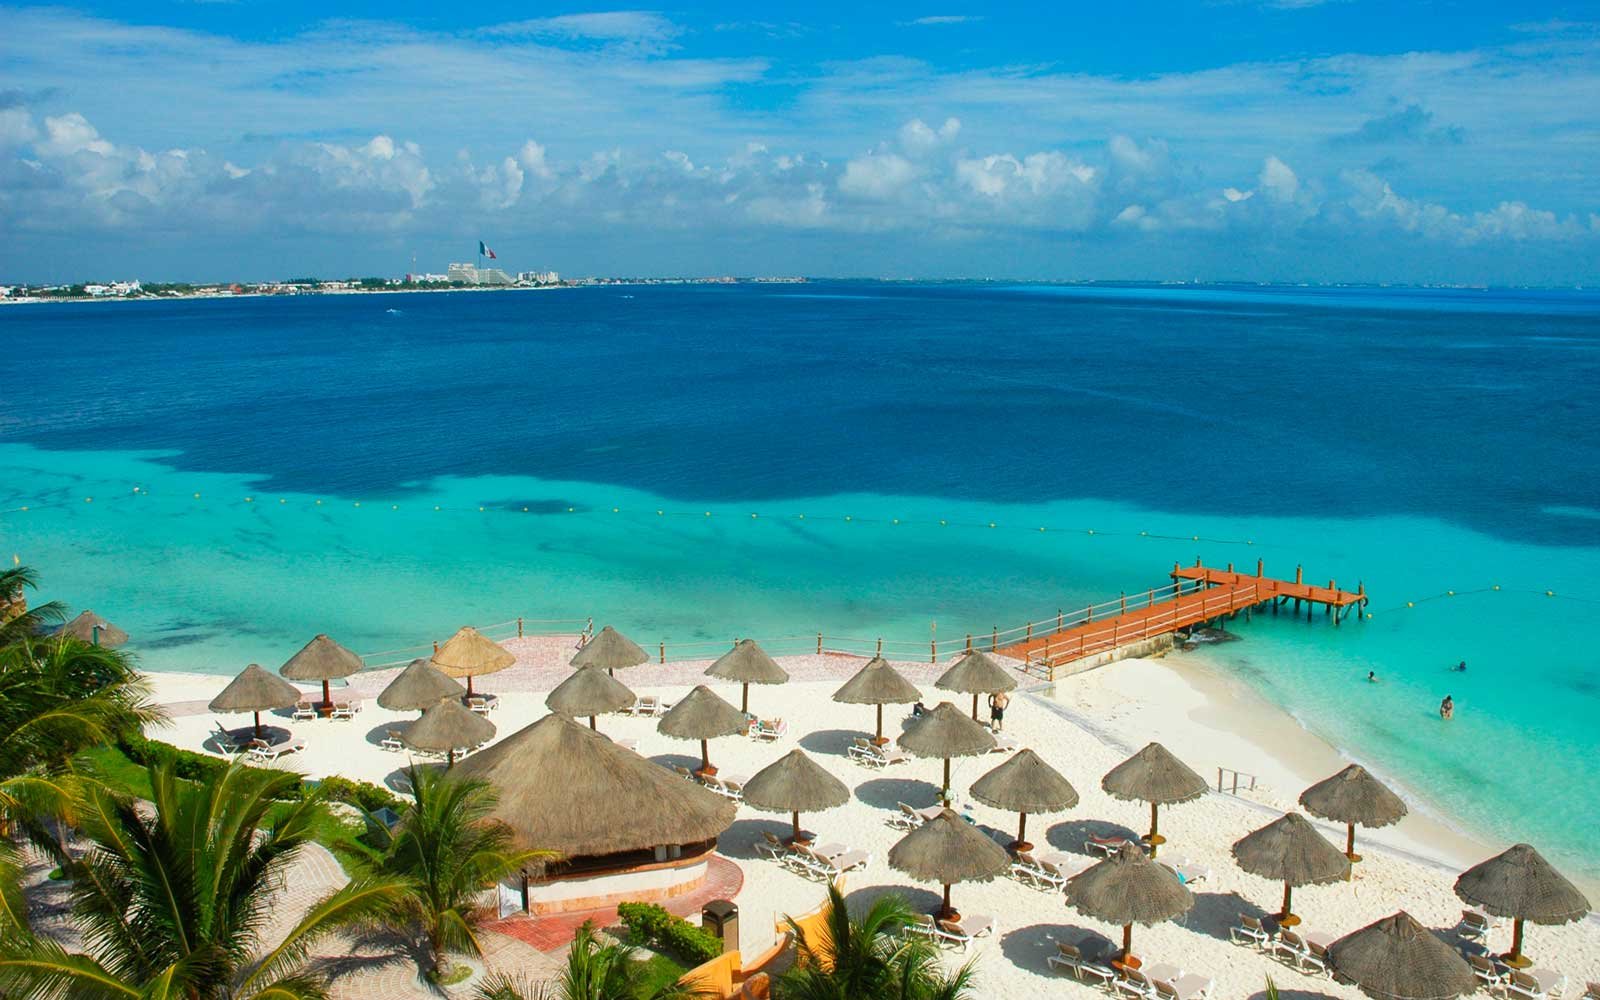 Houston to Cancun Mexico $198 RT Nonstop Airfares on United Airlines BE (Travel February - May 2023)